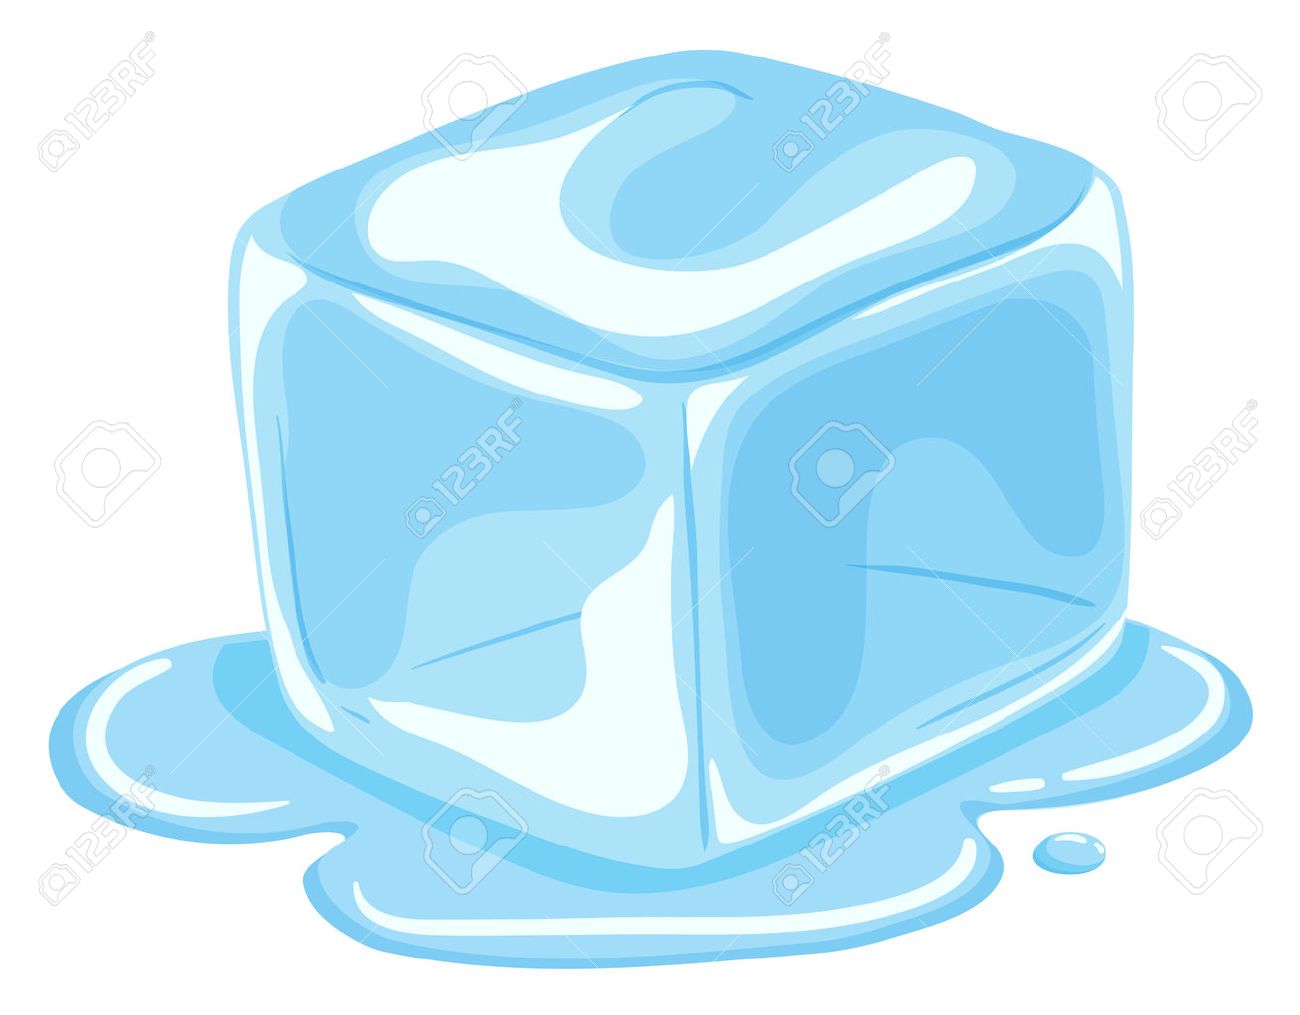 Clipart ice 5 » Clipart Station.